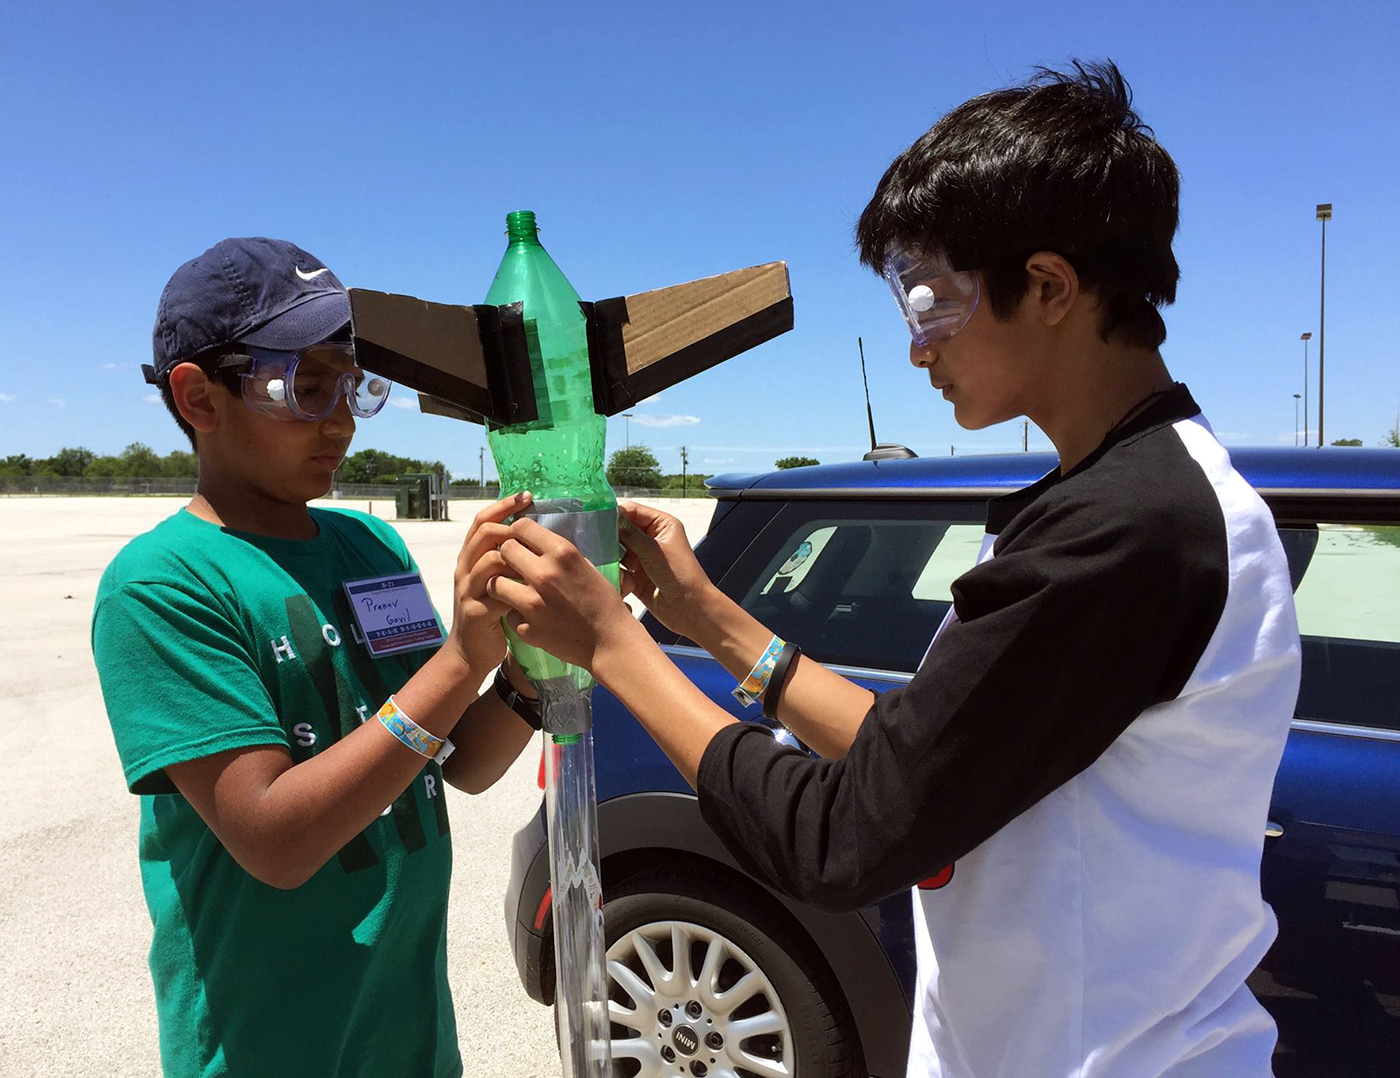 Two high school boys hold a homemade rocket made from a Sprite bottle